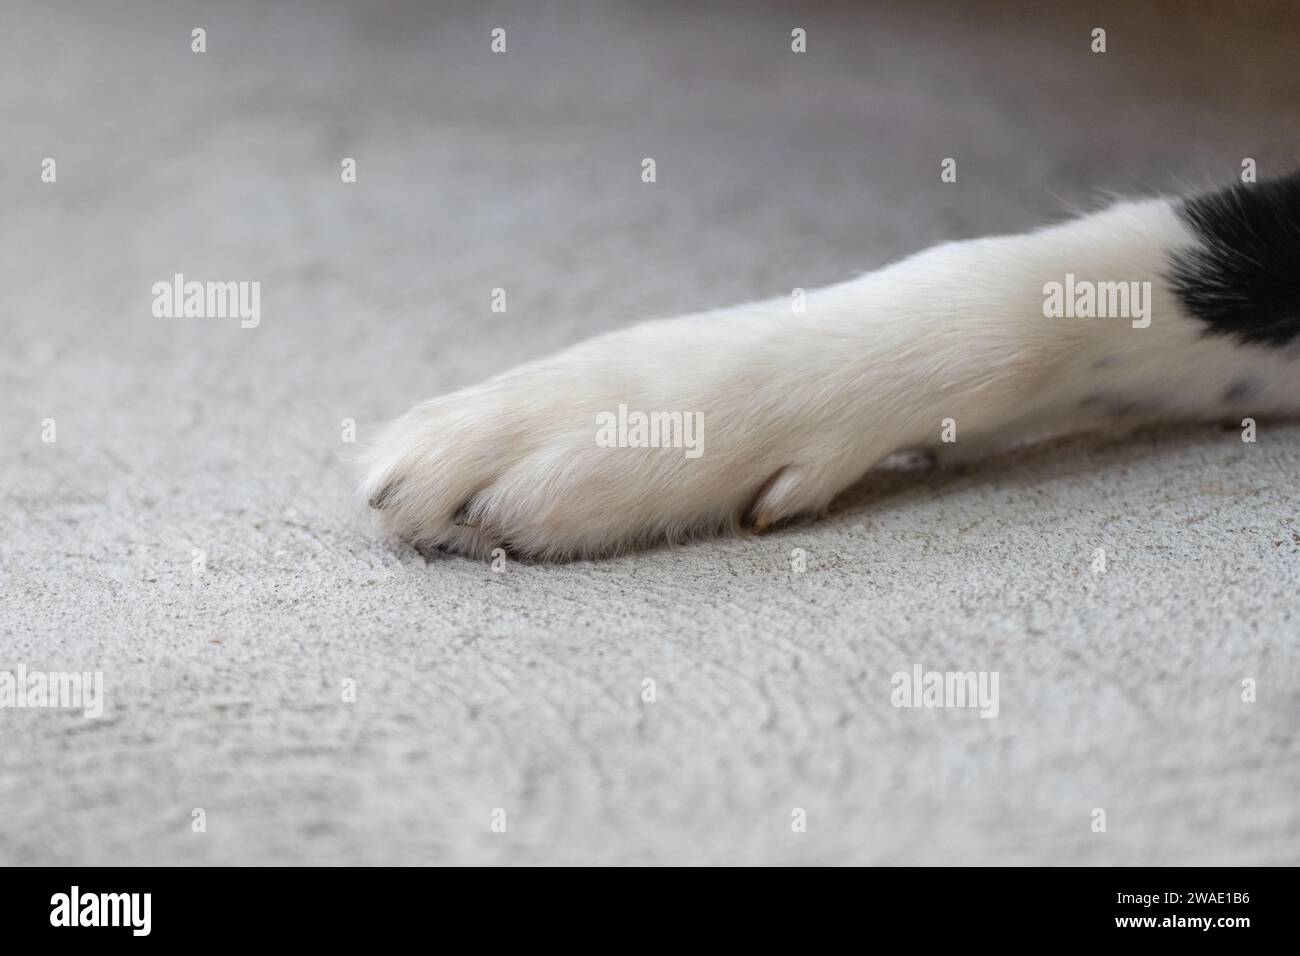 Close up of a dog's paws. Border Collie puppy pads. Legs of animal lying on a wooden deck. Stock Photo